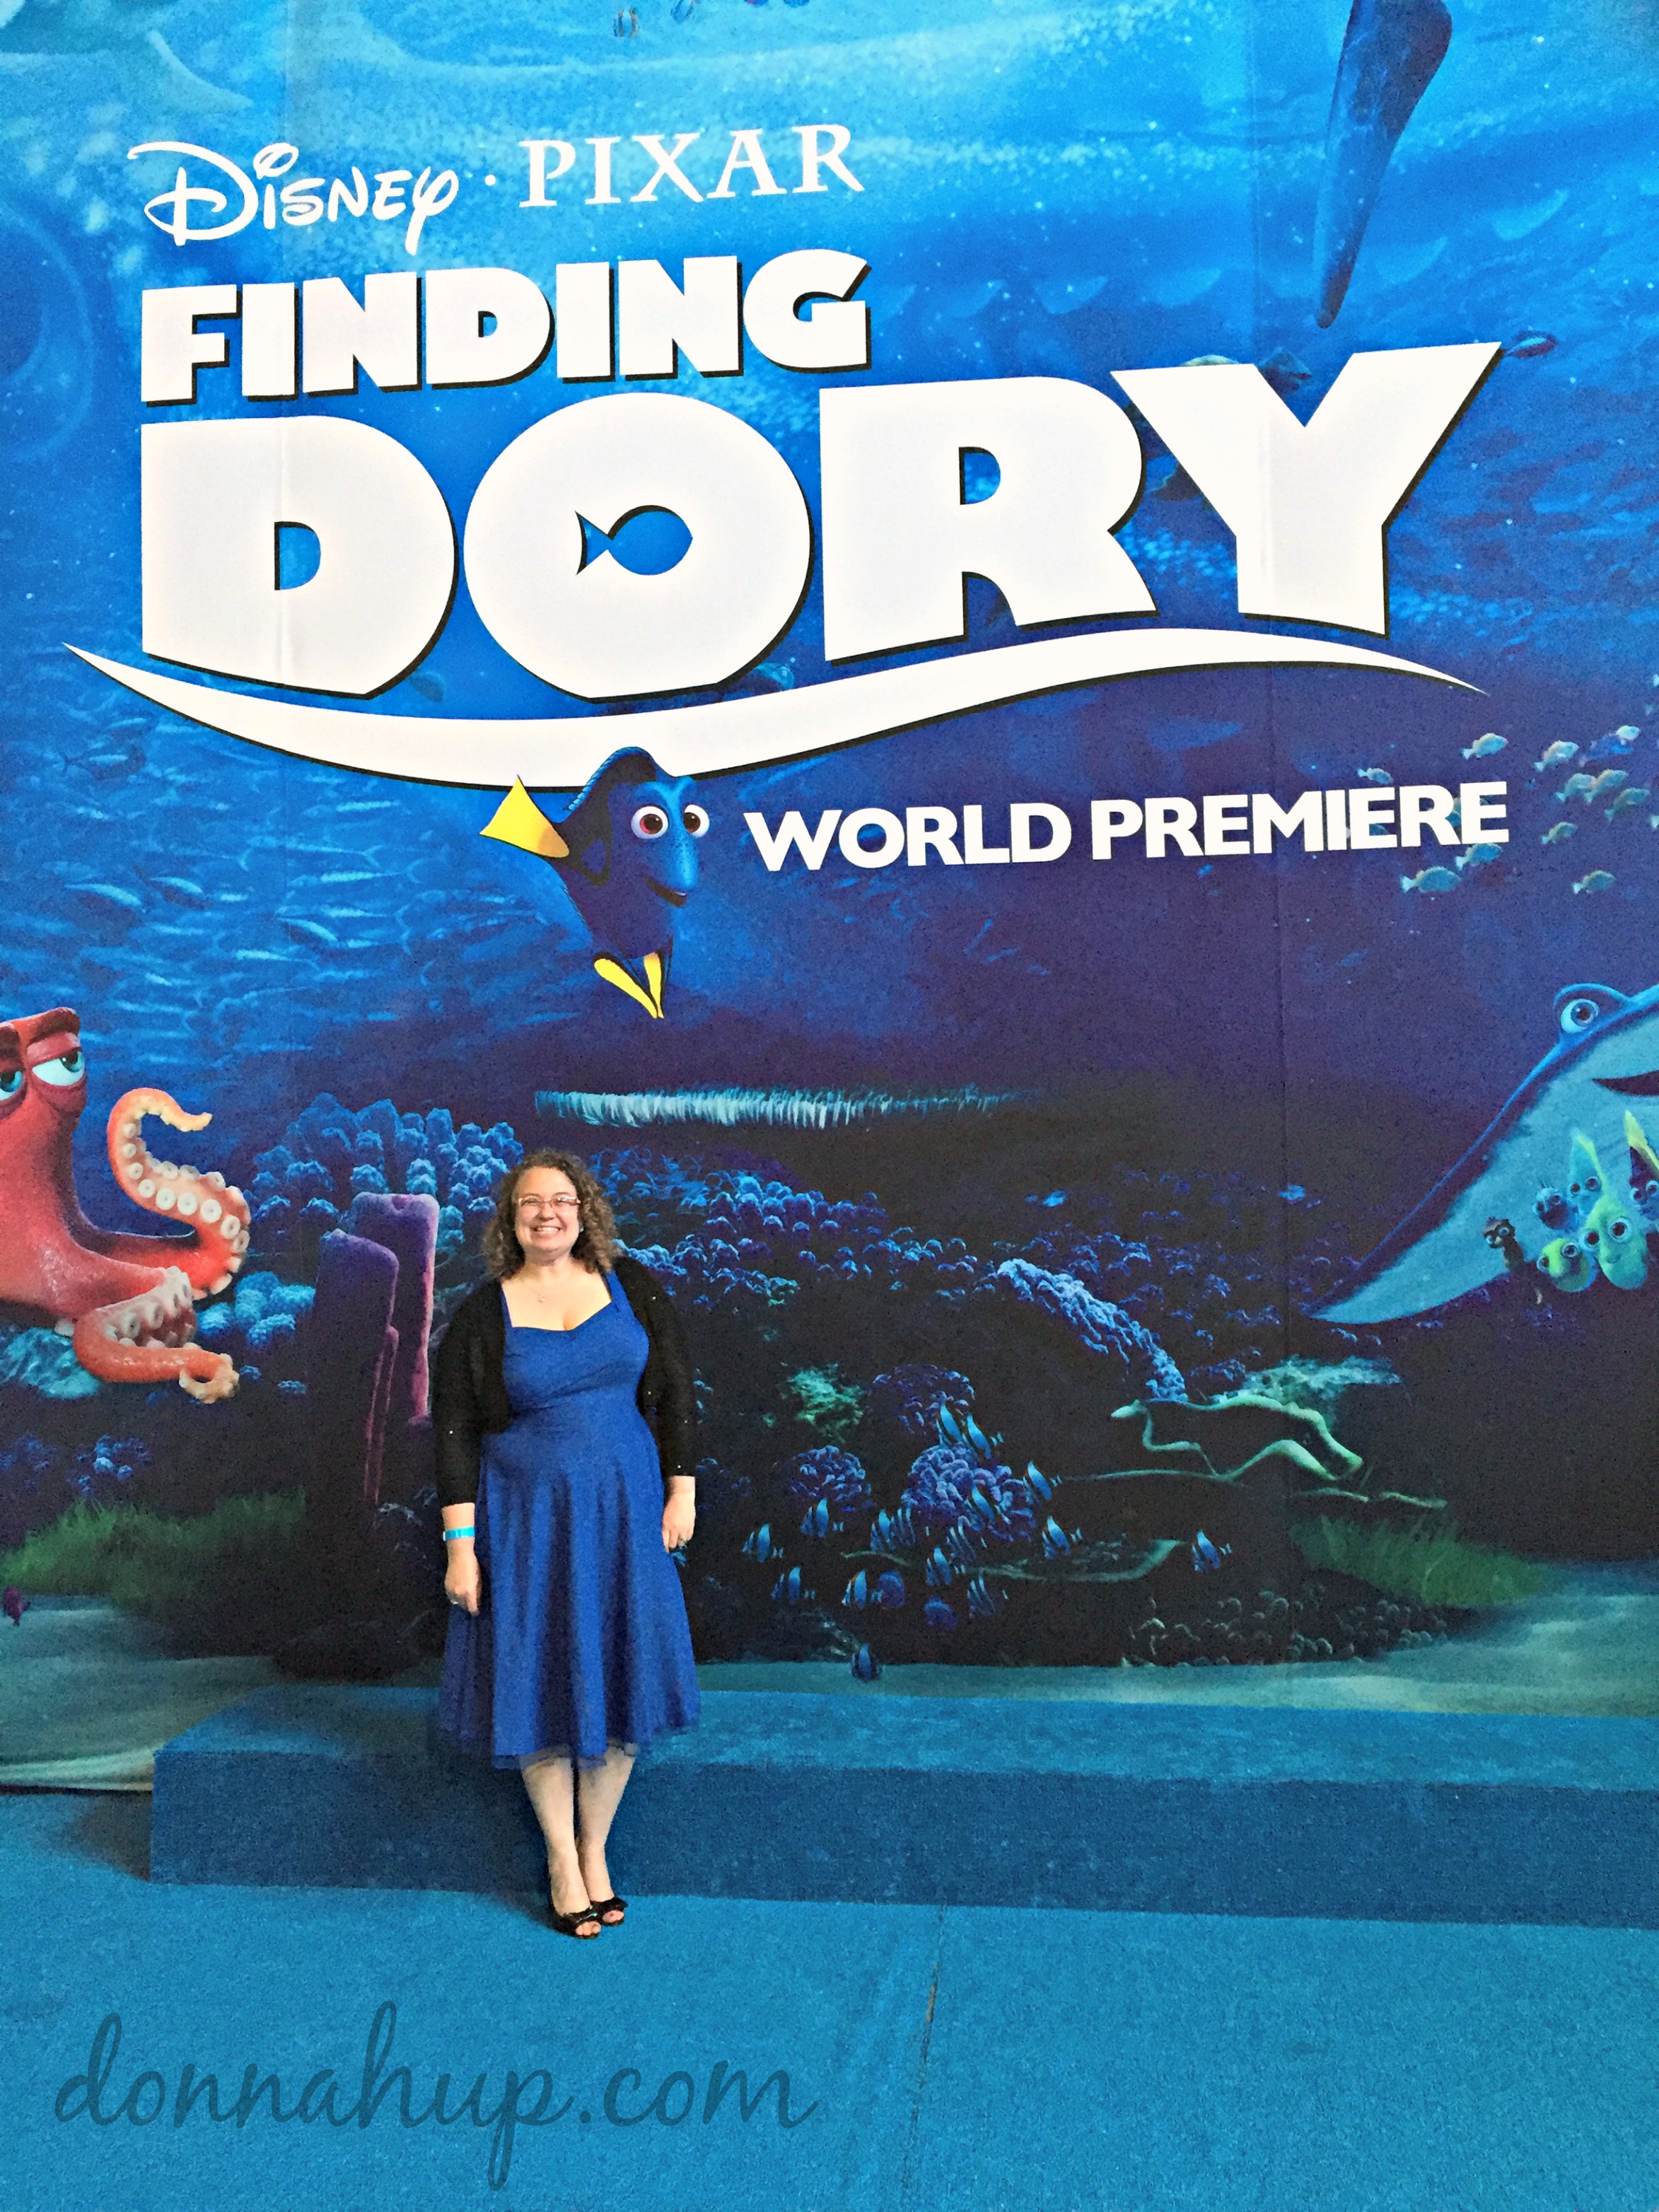 I was at the FINDING DORY World Premiere! #FindingDoryEvent #HaveYouSeenHer 